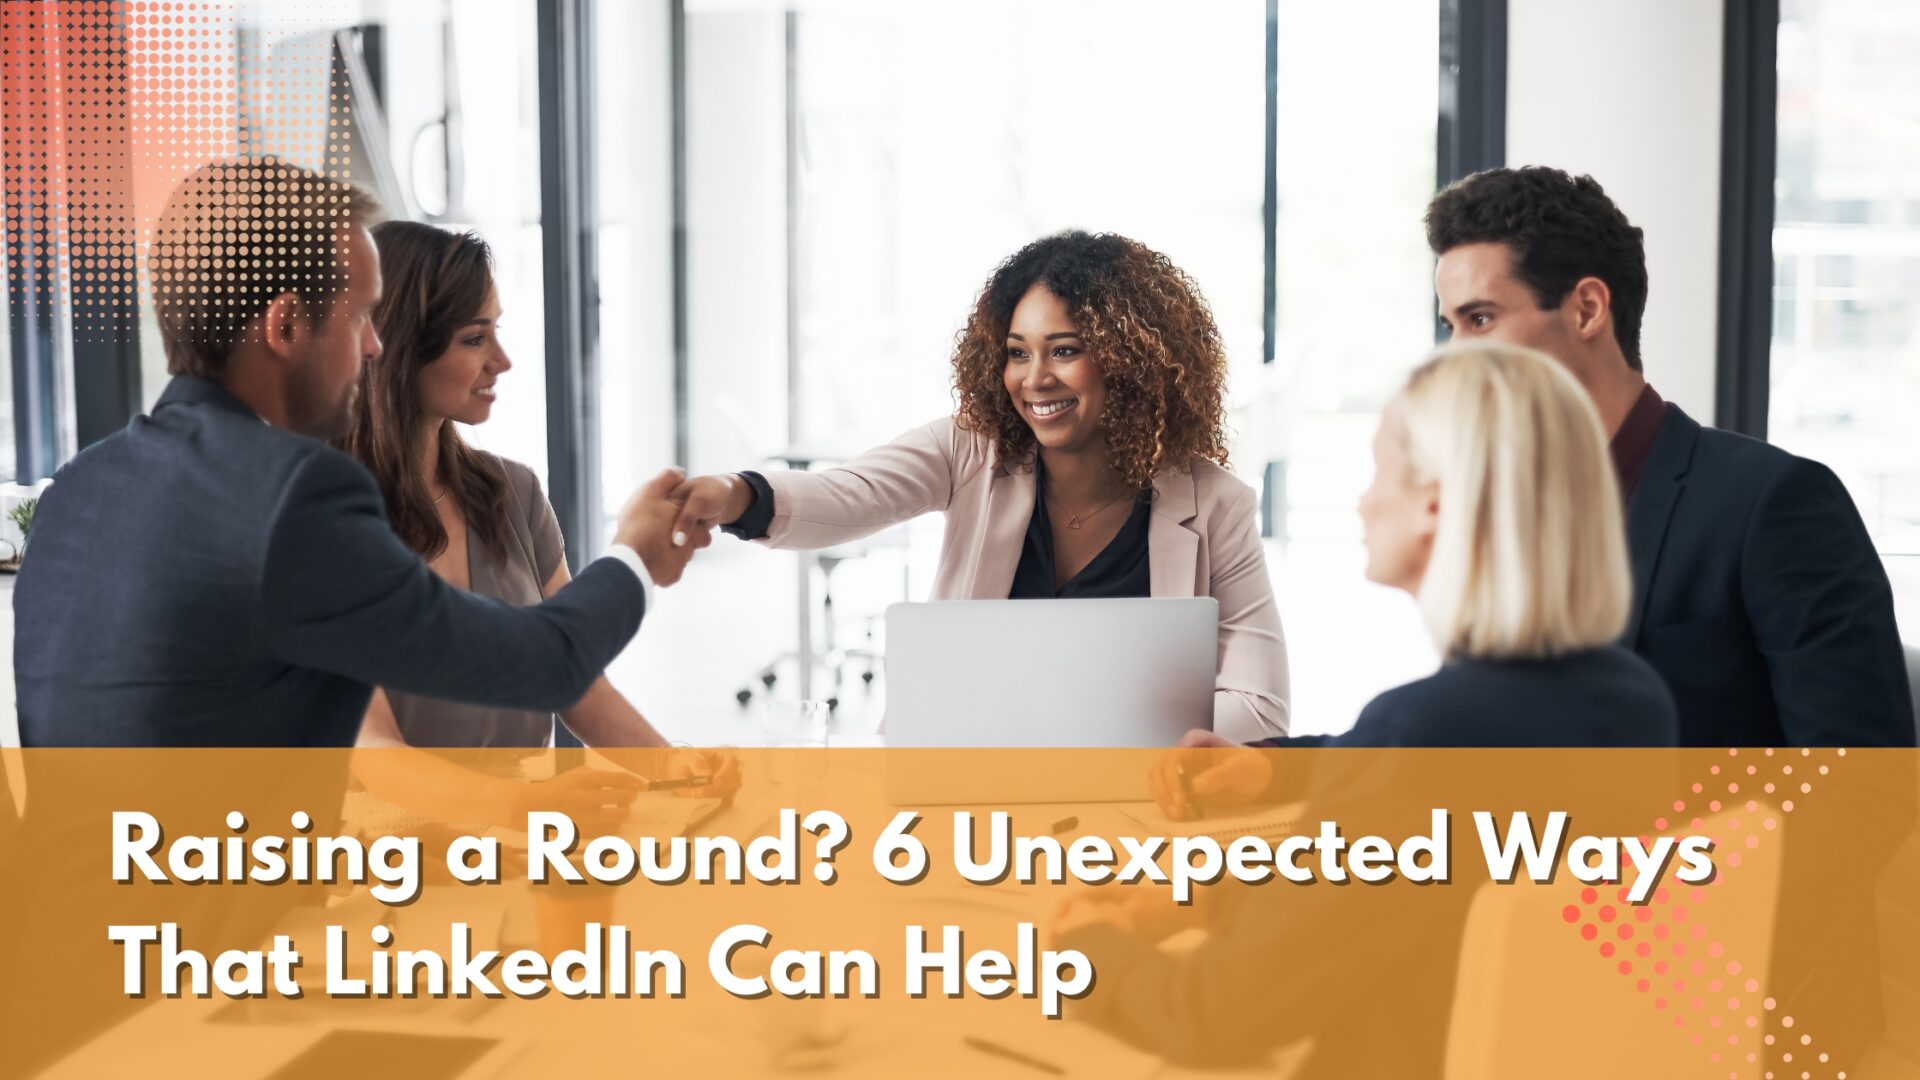 Raising a Round? 6 Unexpected Ways that LinkedIn Can Help